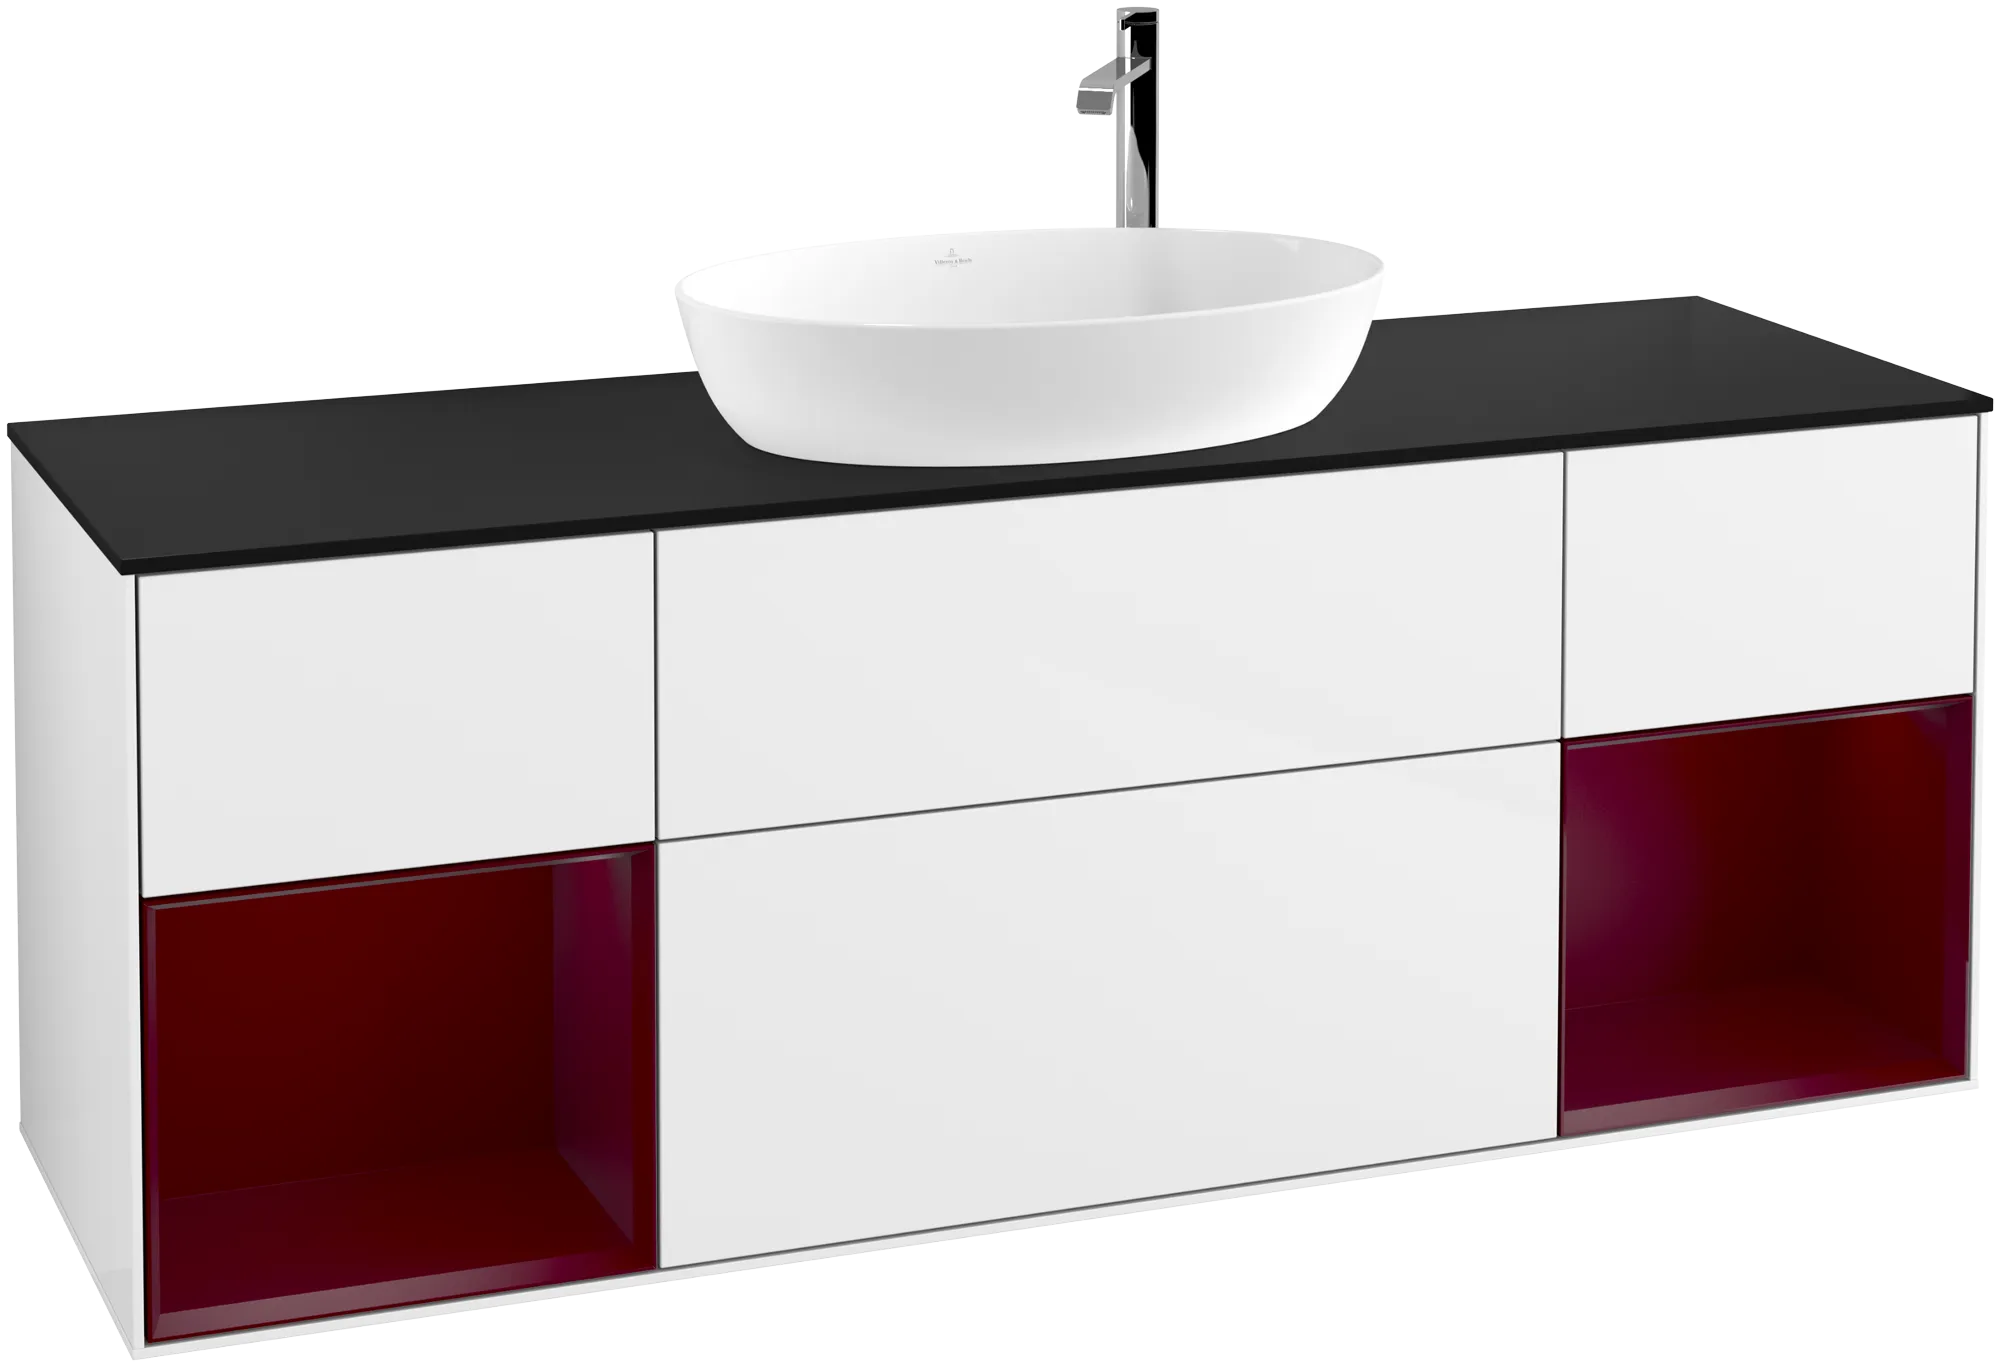 Picture of VILLEROY BOCH Finion Vanity unit, with lighting, 4 pull-out compartments, 1600 x 603 x 501 mm, Glossy White Lacquer / Peony Matt Lacquer / Glass Black Matt #G982HBGF